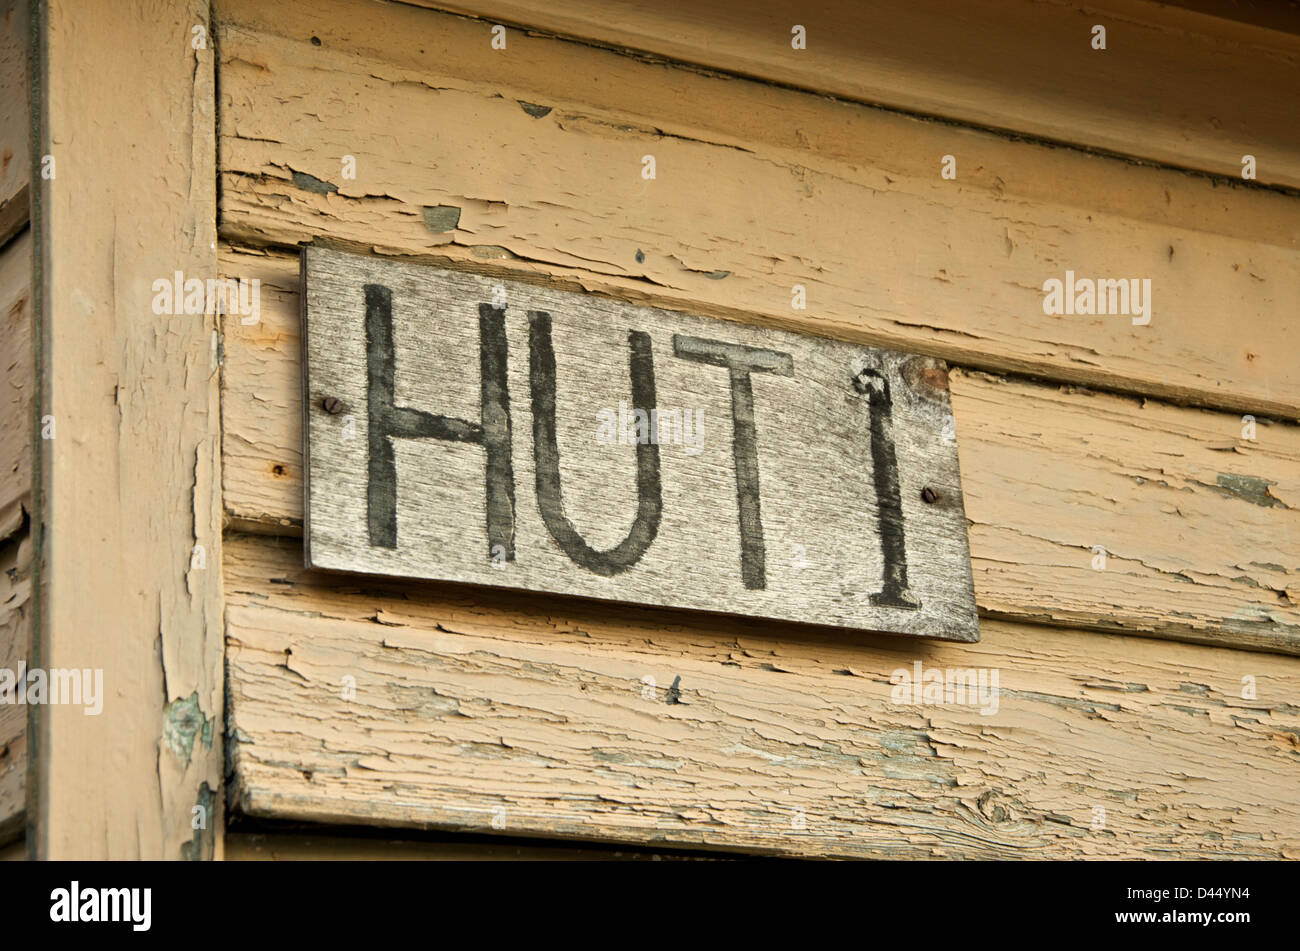 Hut 1 sign on wooden hut at Bletchley Park. This is one of the original wartime huts that still remain. Stock Photo